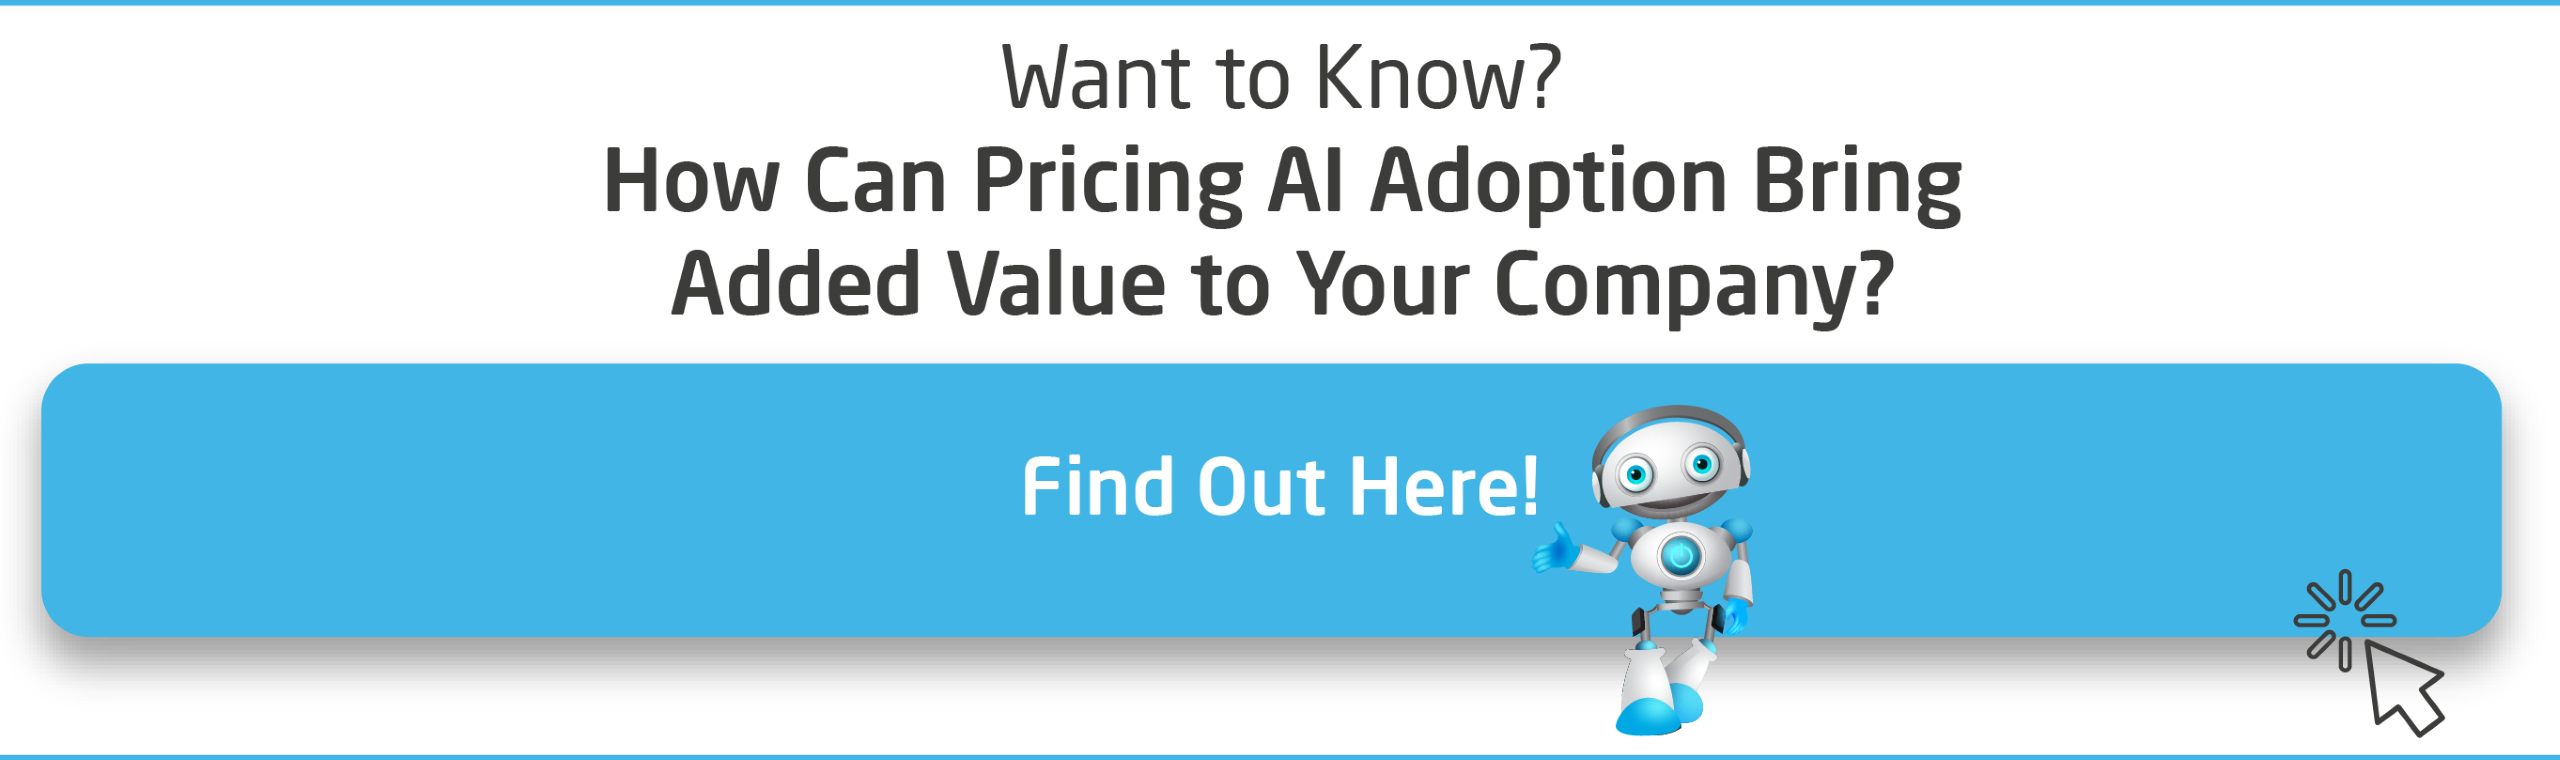 CTA-How-Can-Pricing-AI-Adoption-Bring-Added-Value-to-Your-Company